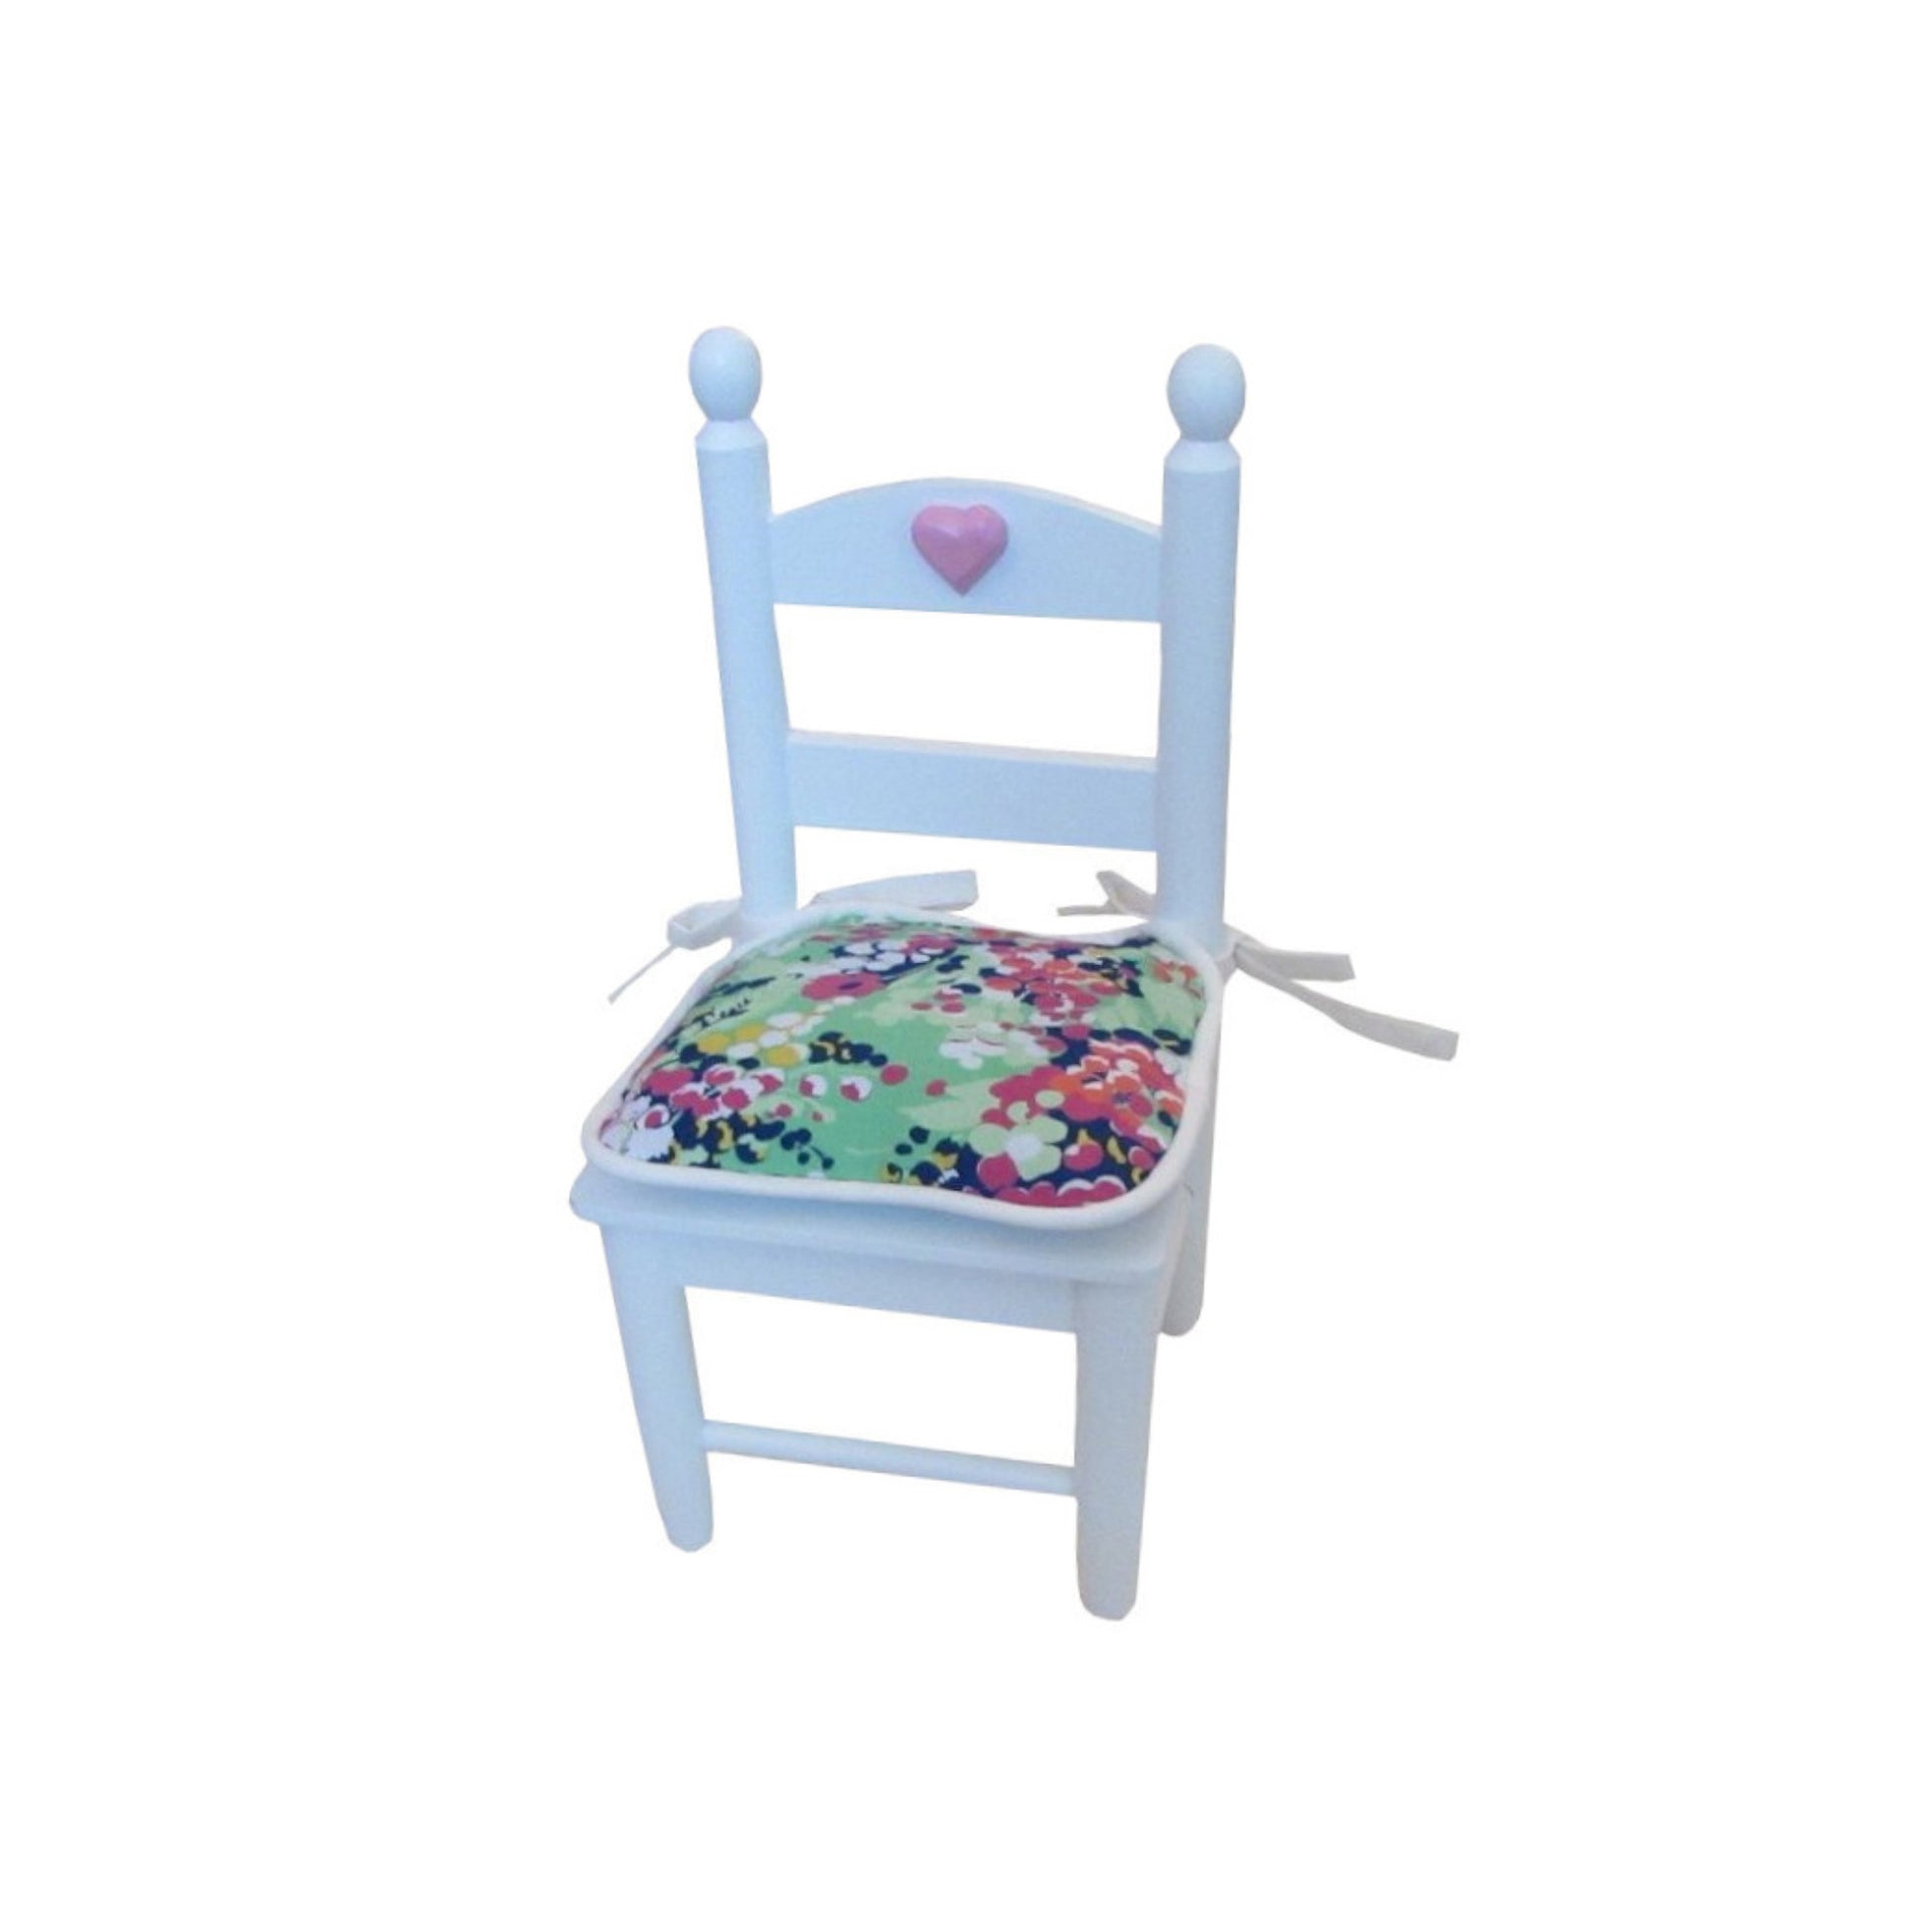 Green, Pink, and Blue Floral Doll Chair Cushion for 18-inch dolls